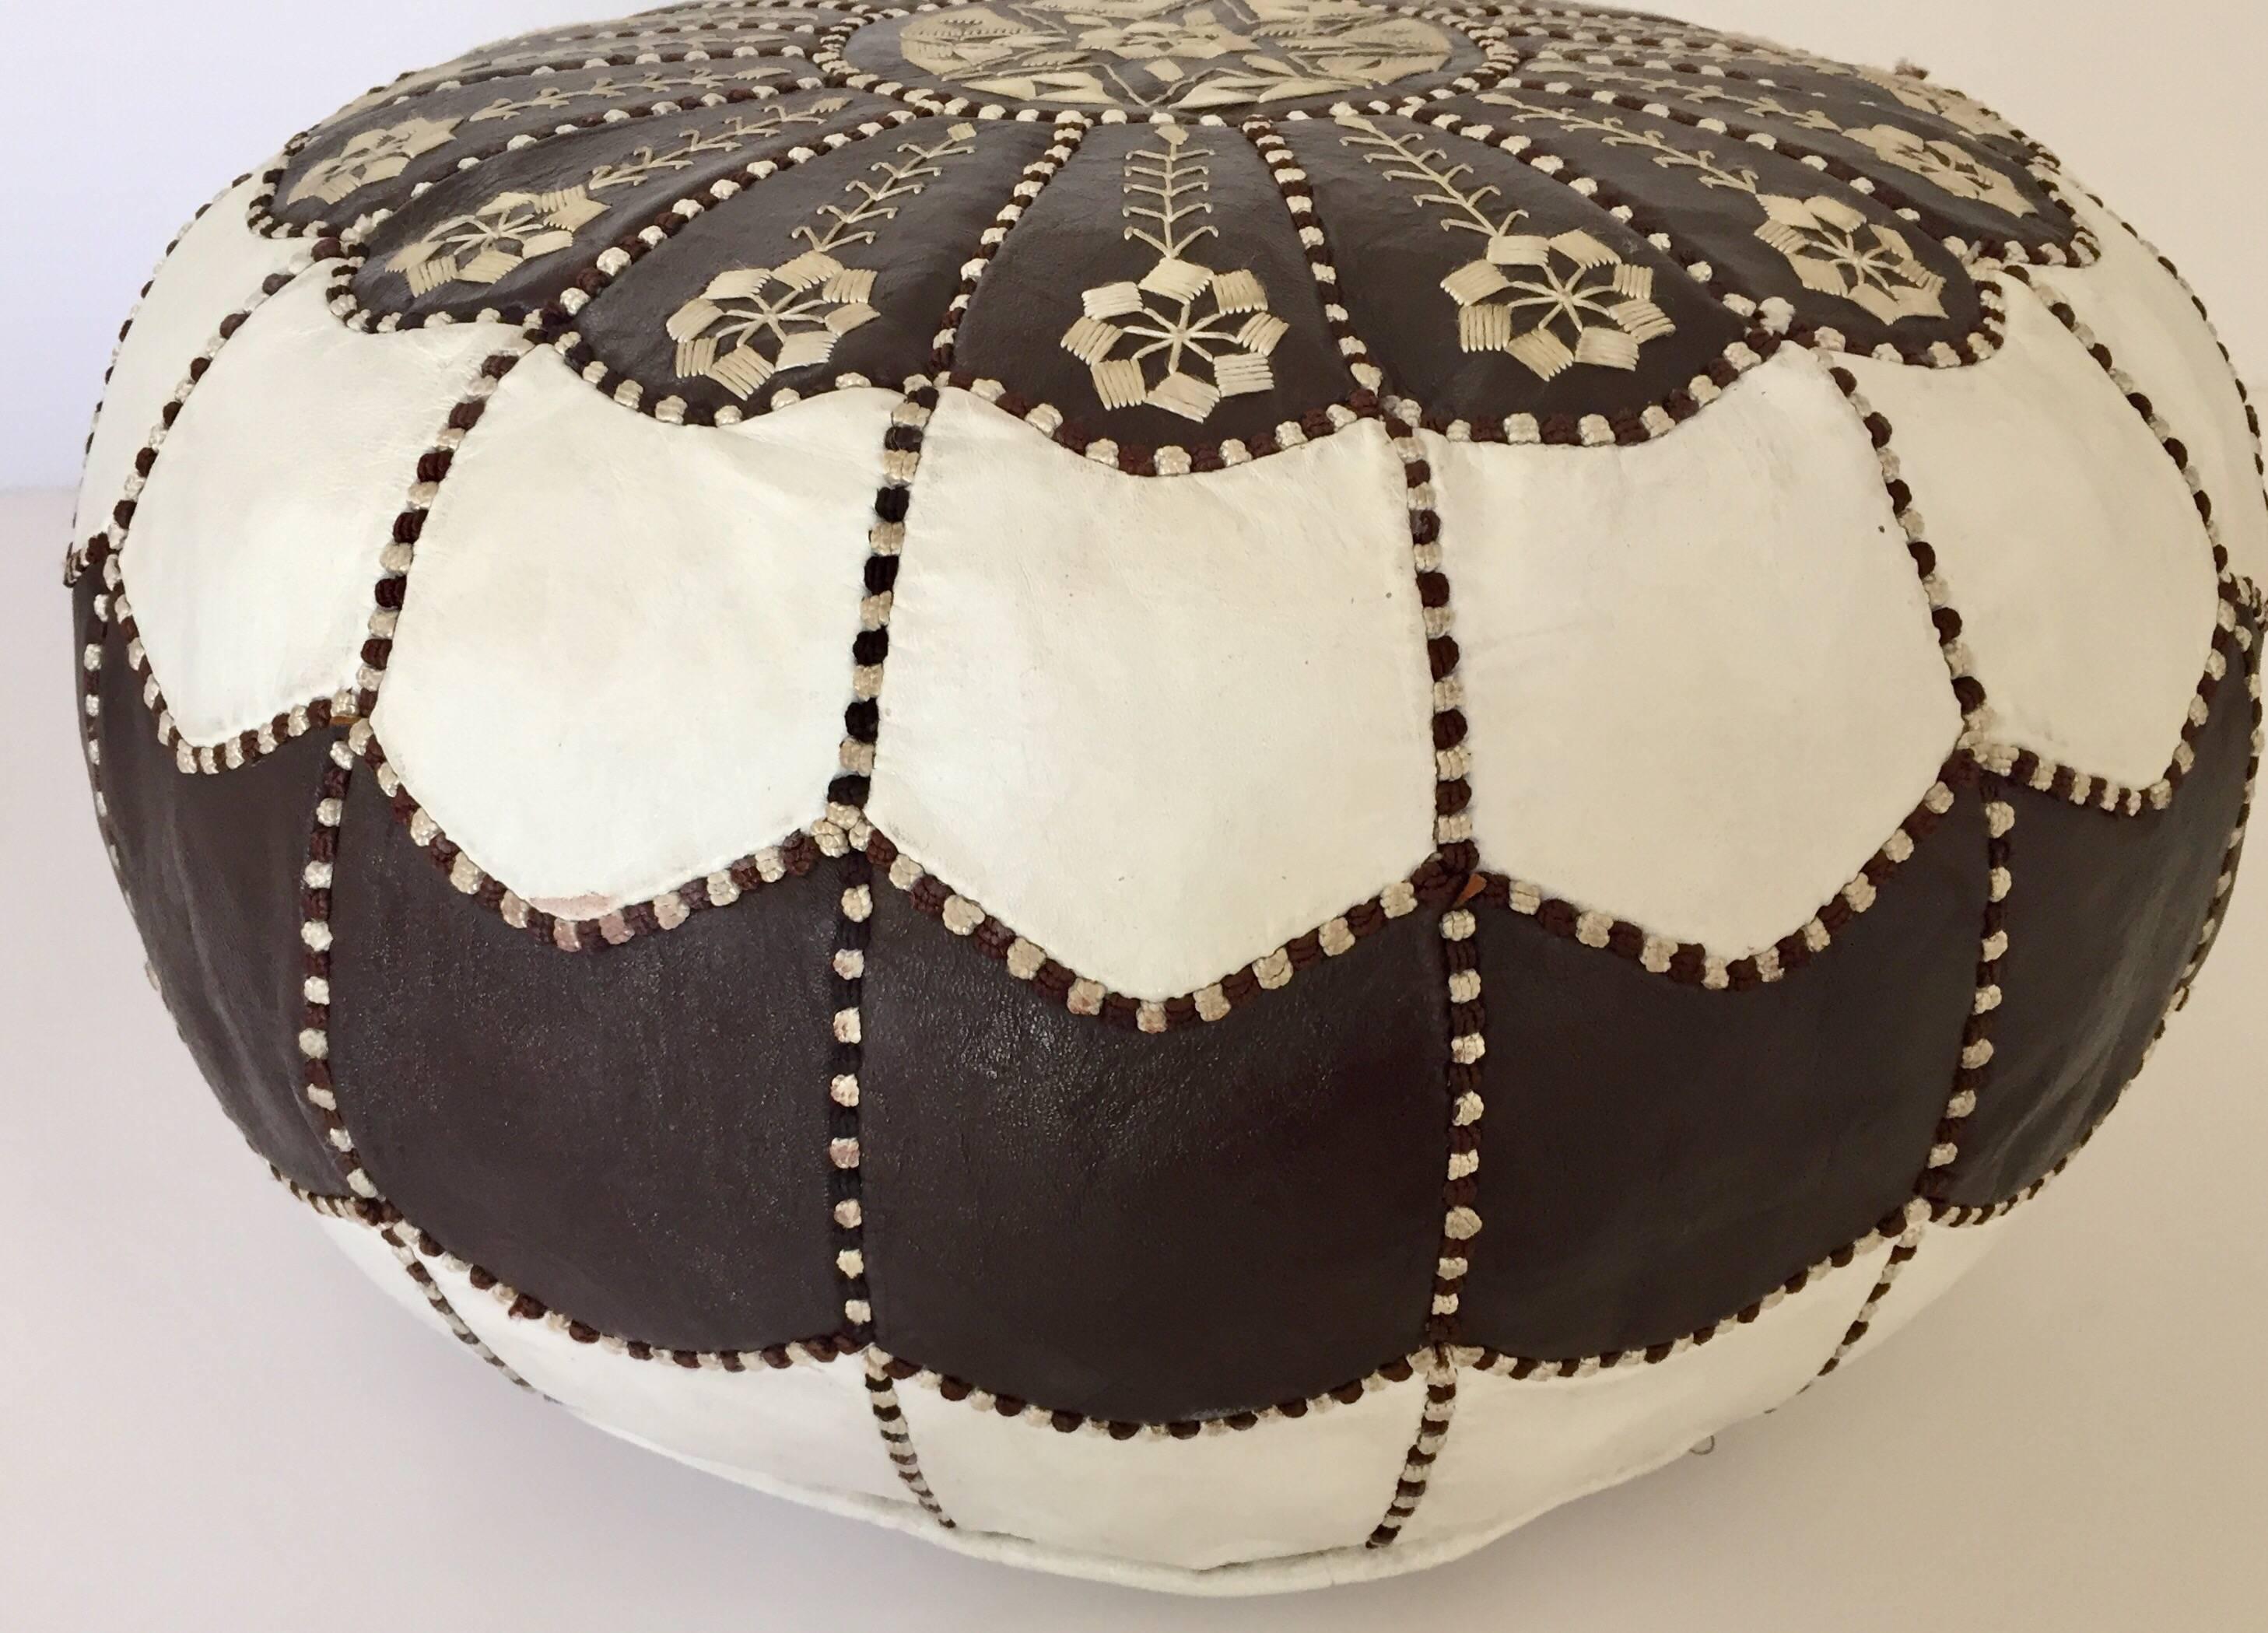 20th Century Moroccan Vintage Round Leather Pouf Brown and White Embroidered